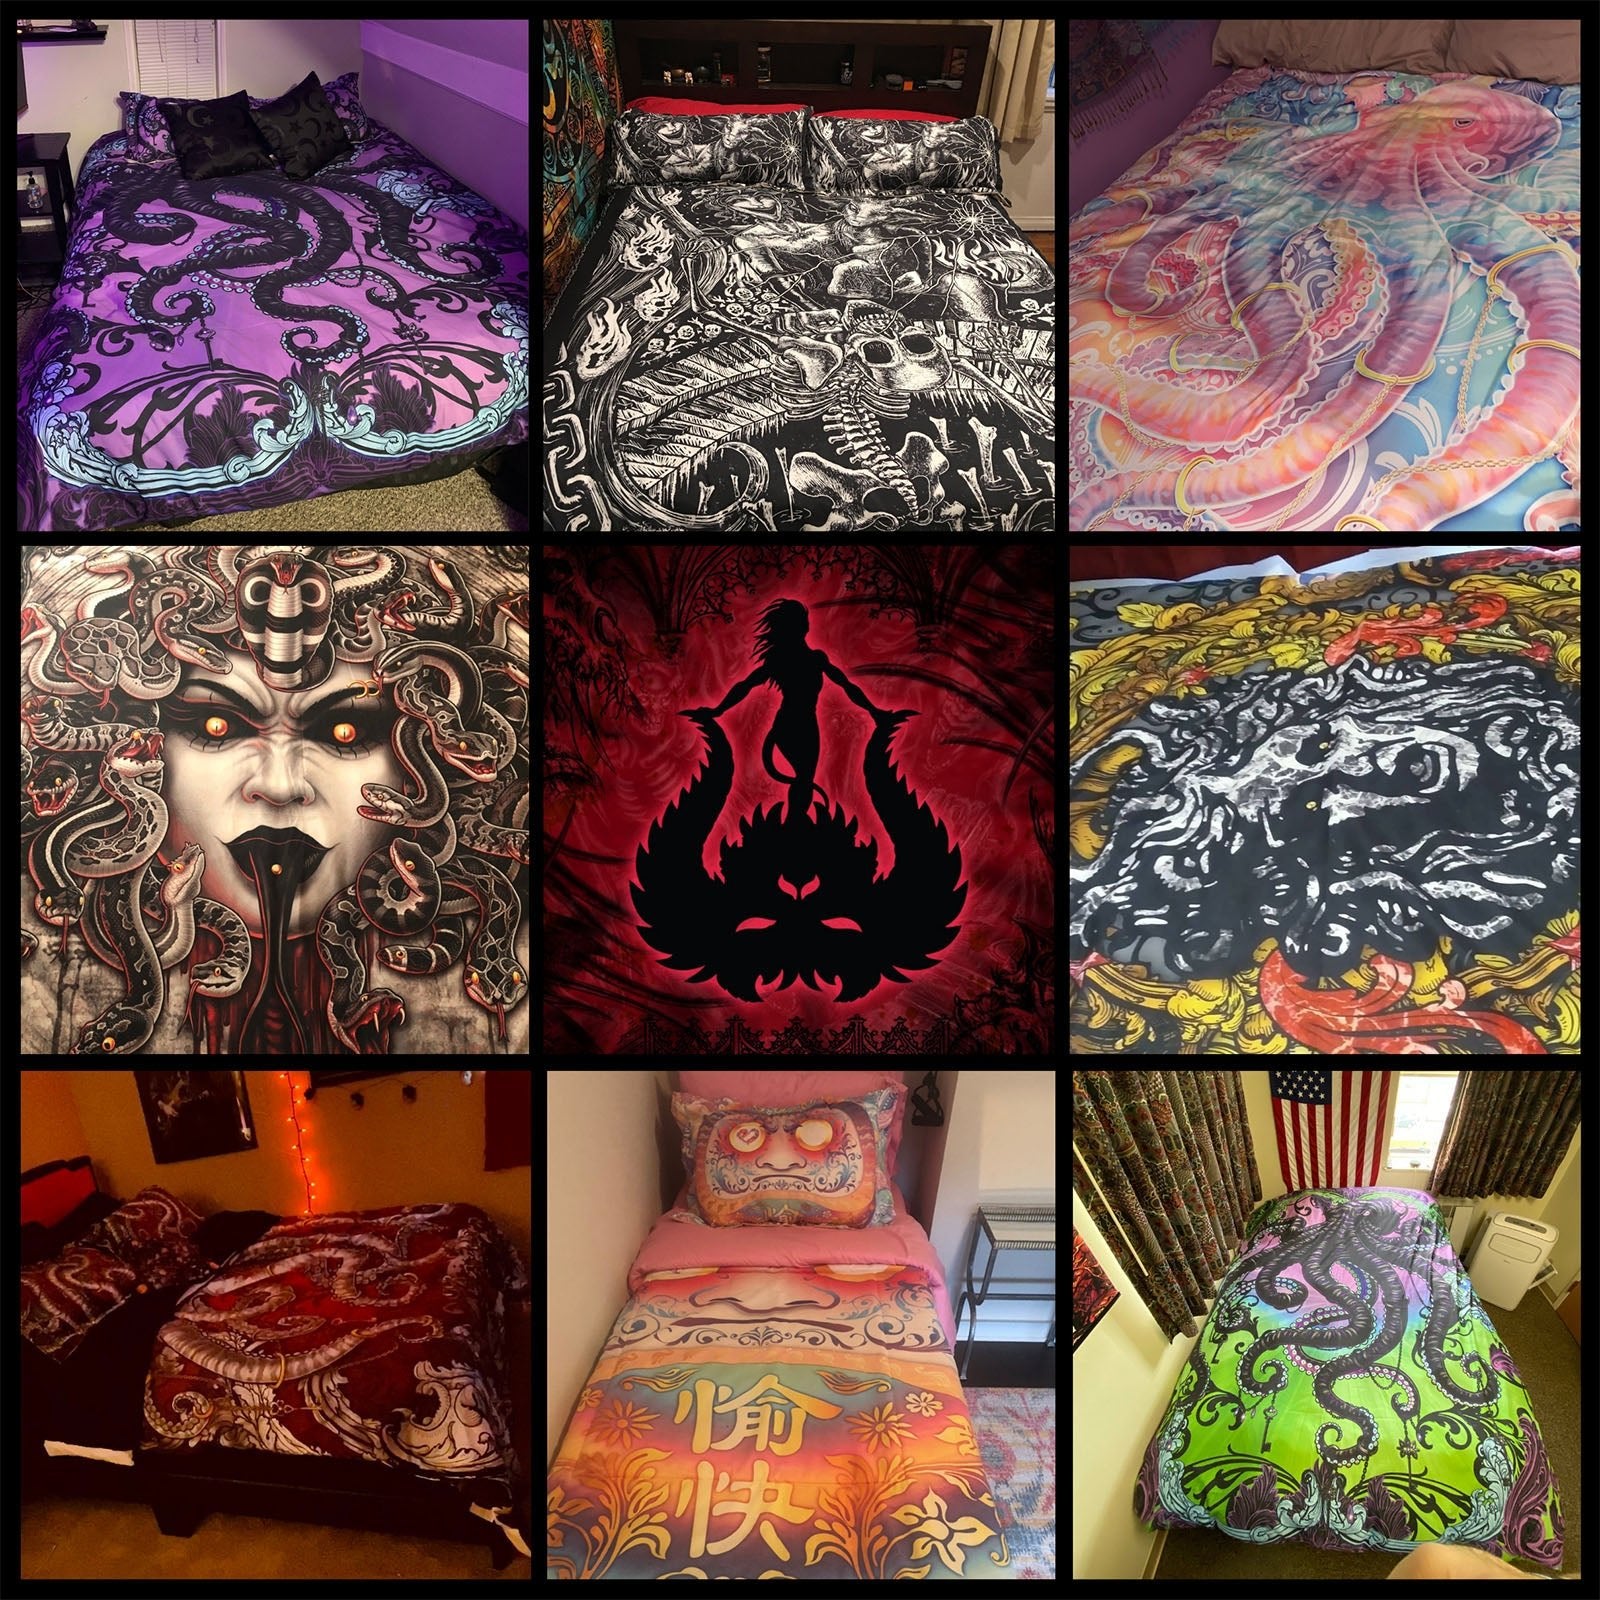 Horror Bedding Set, Comforter and Duvet, Halloween Bed Cover and Bedroom Decor, King, Queen and Twin Size - Gore and Blood Cross - Abysm Internal